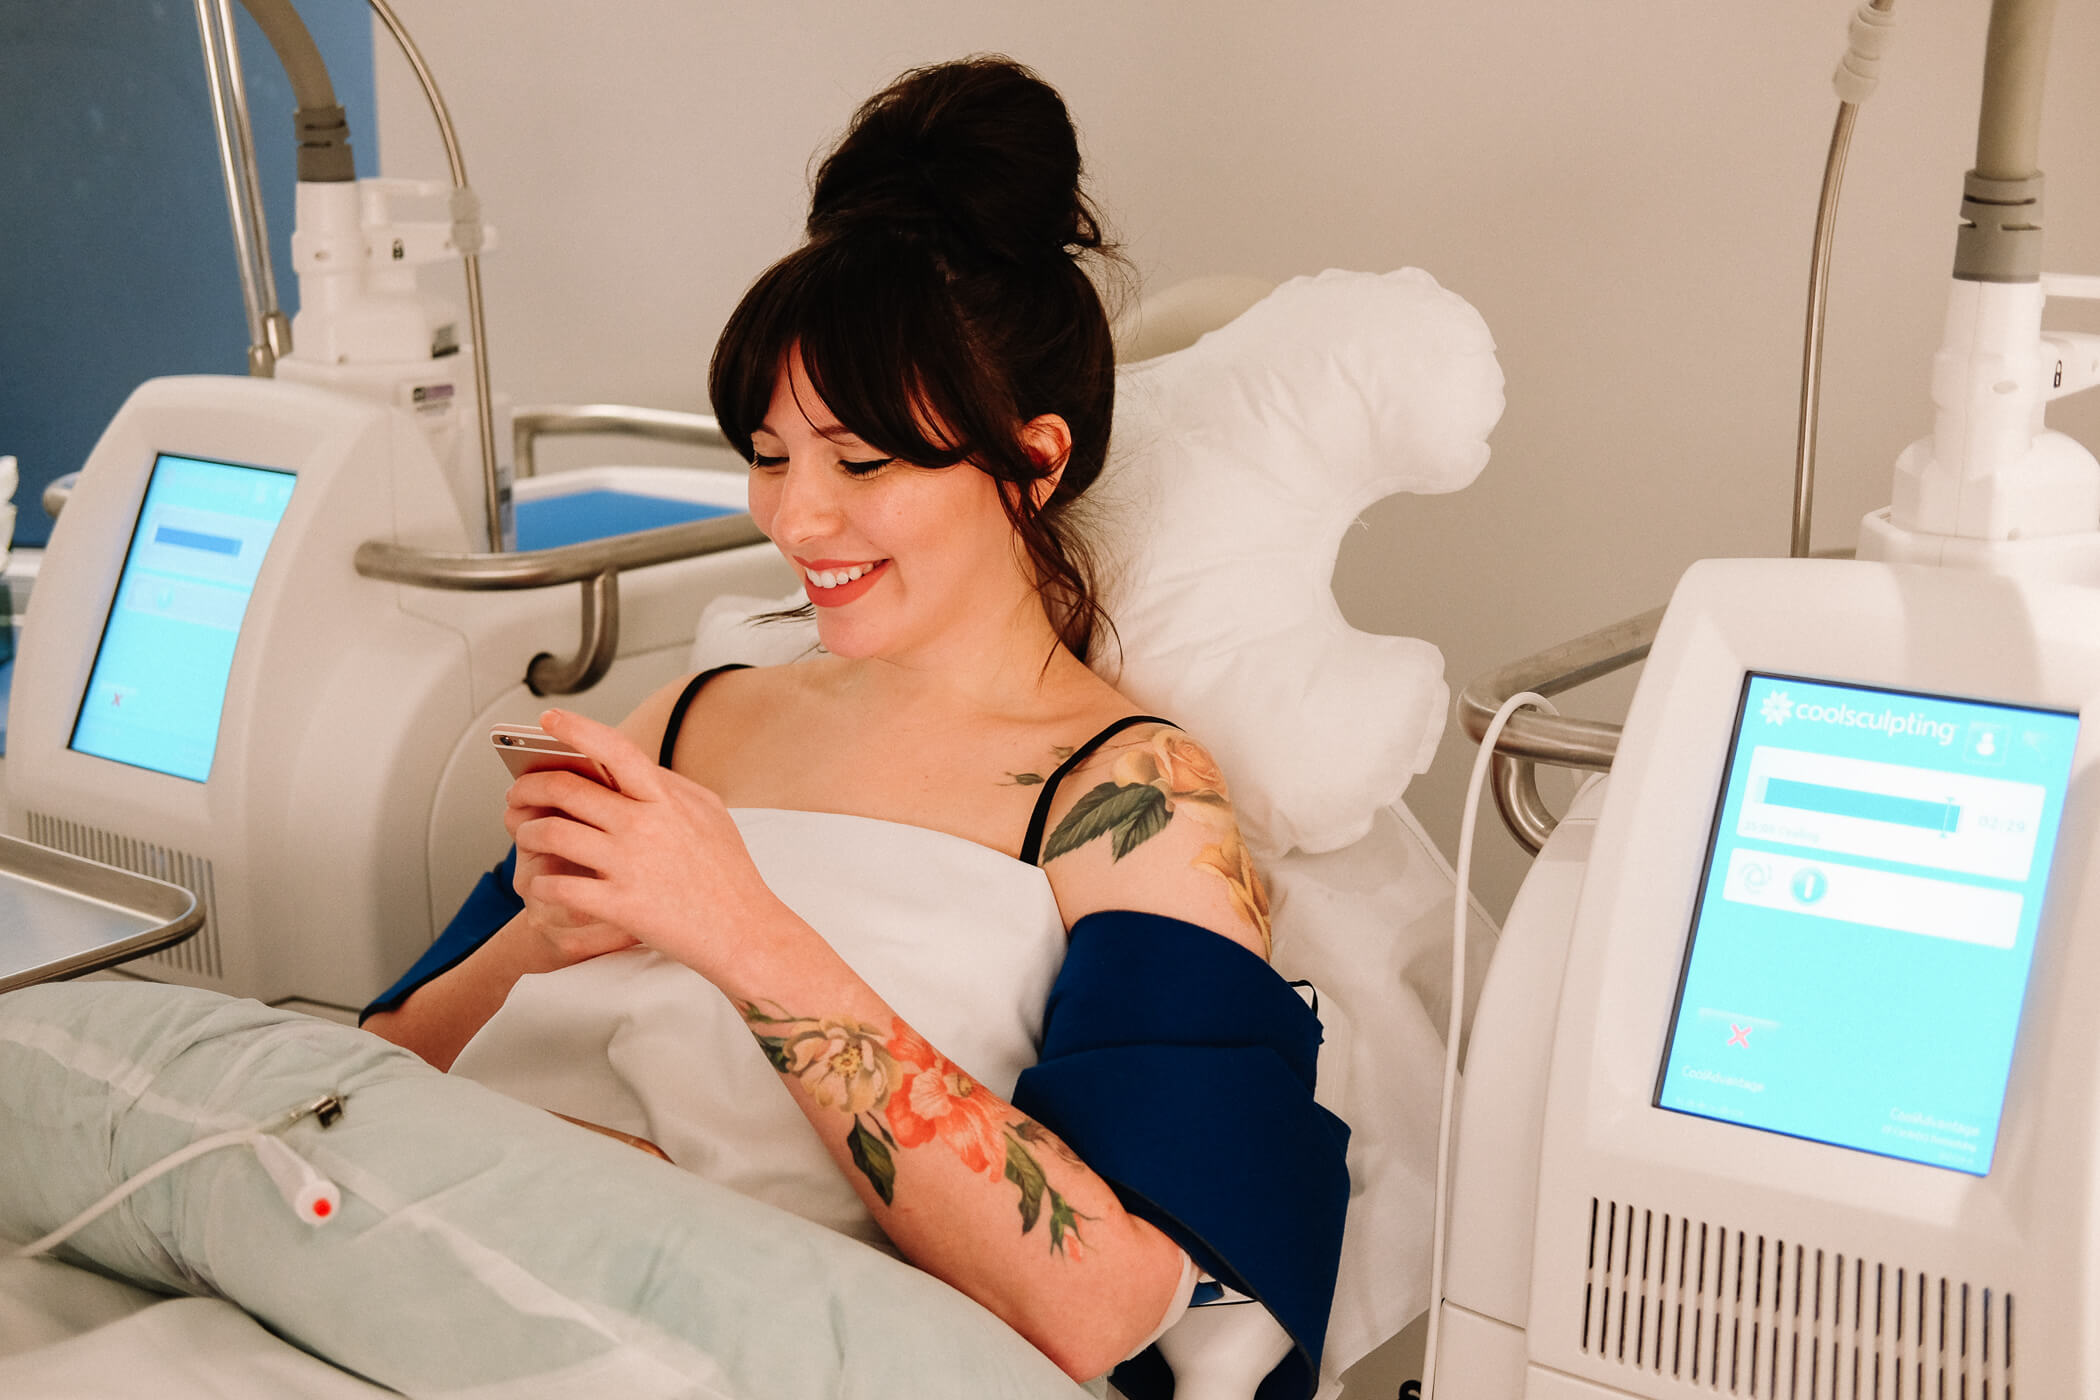 How CoolSculpting Helped with My Biggest Insecurity, CoolSculpting my arms, Laura Dyer at Dr. Amy Wechsler Dermatology